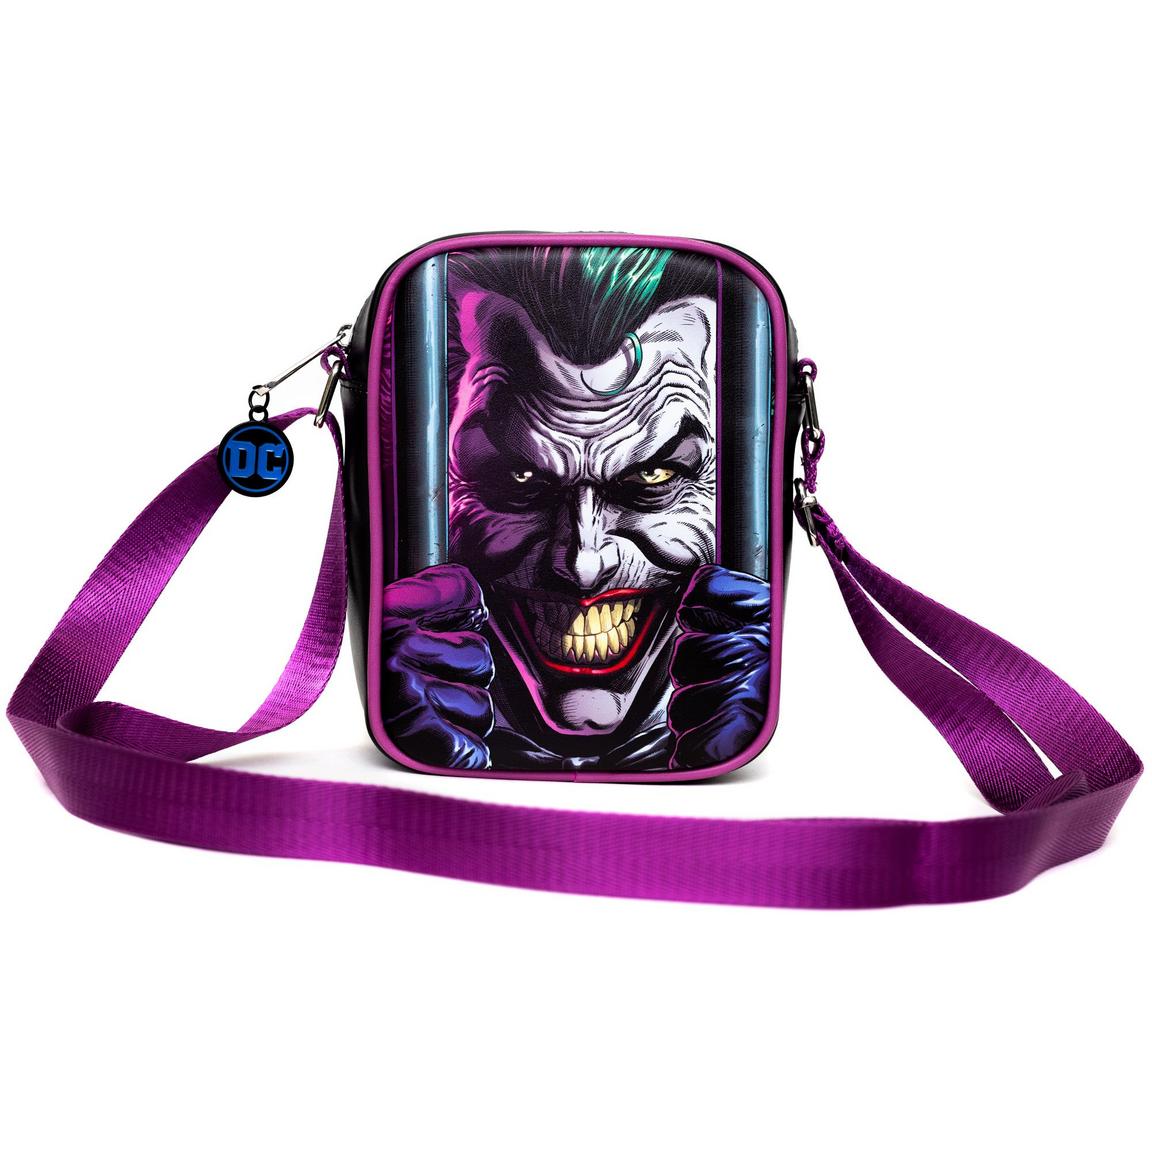 Buckle-Down DC Comics Batman Joker Polyurethane Crossbody Bag with Piping Edge and Cell Phone Pocket, Size: One Size, Buckle Down